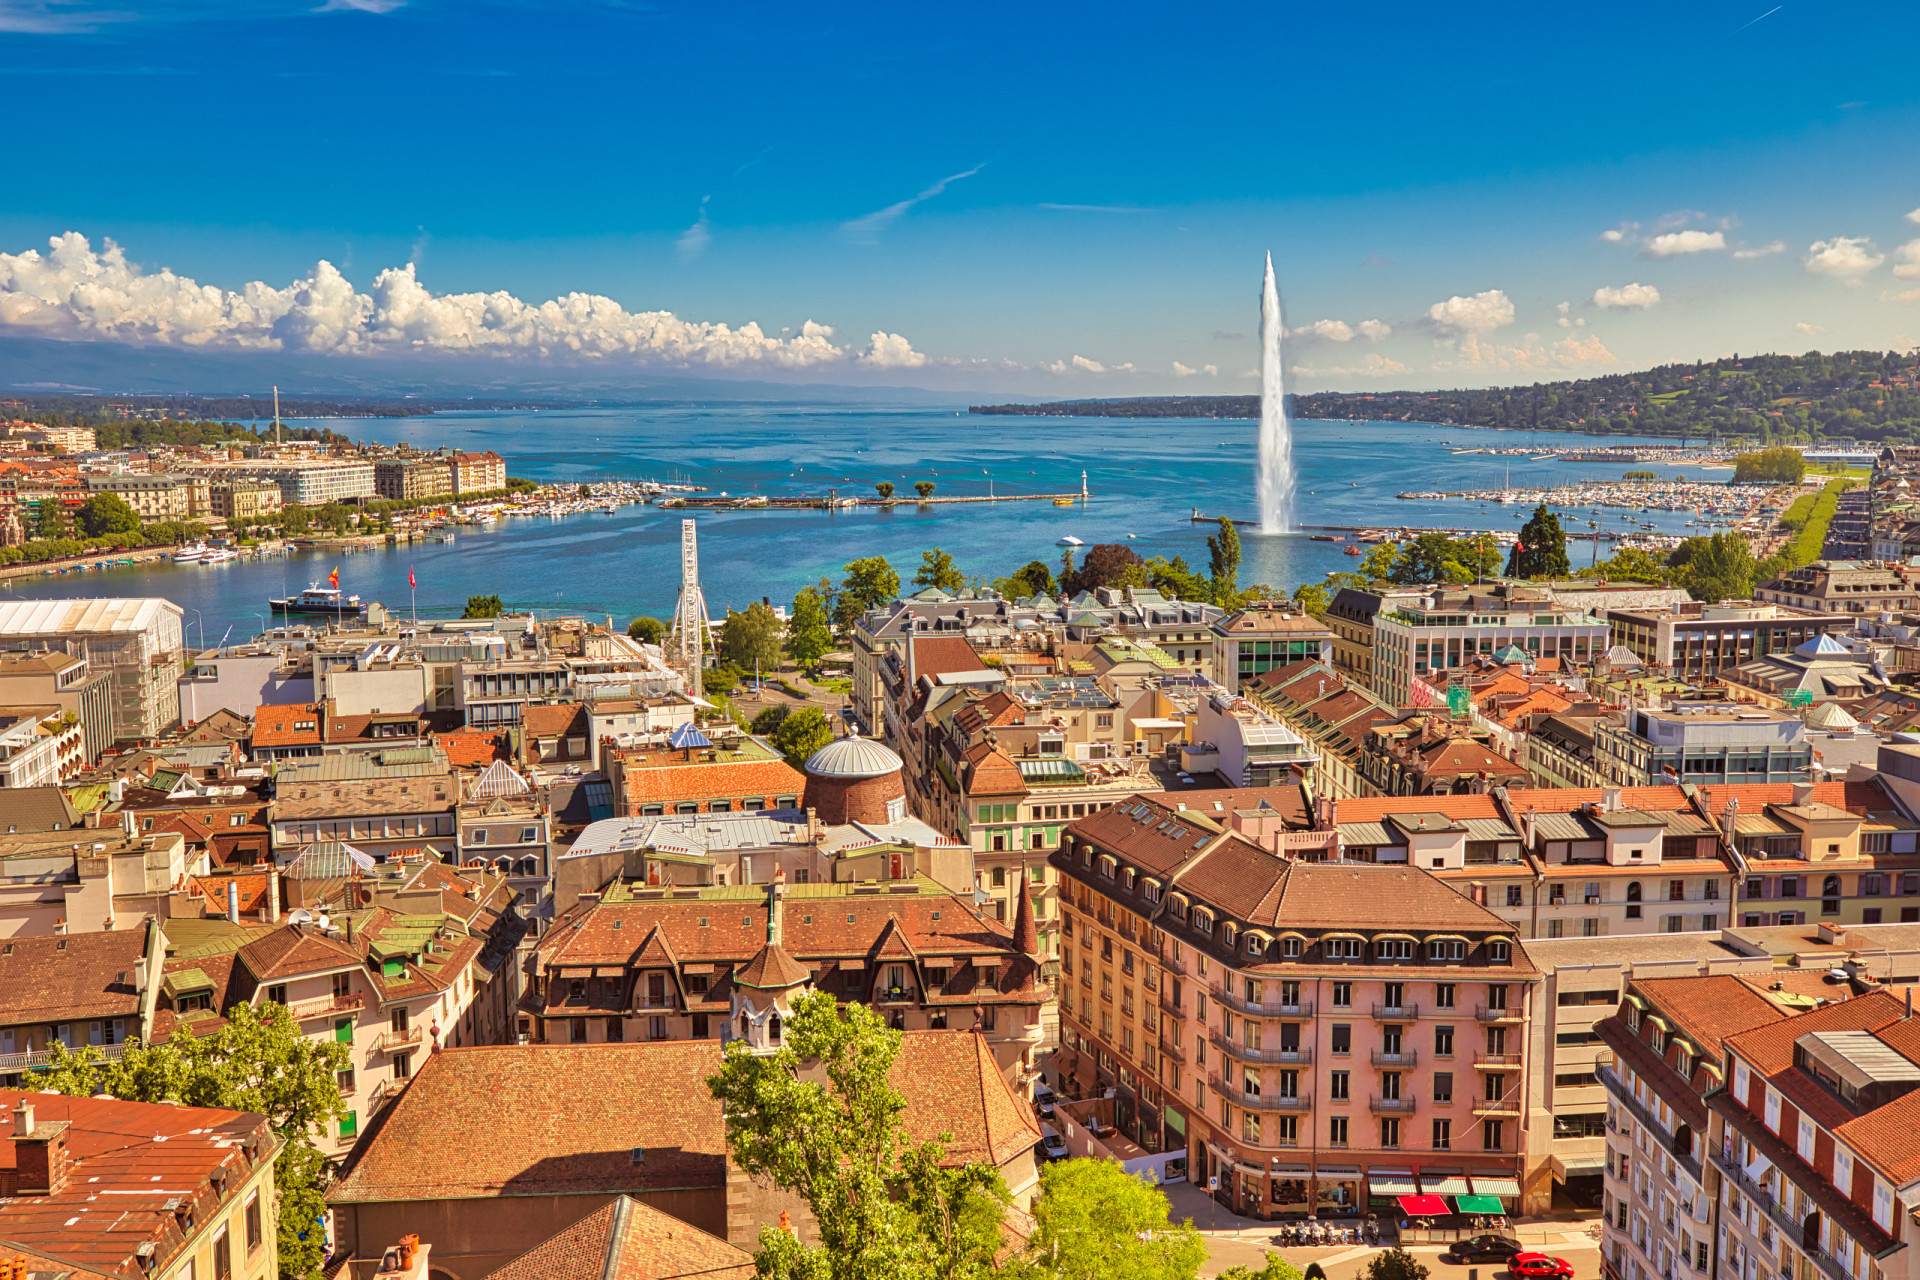 <p>Geneva, with a rent index of 69.0, is a city of international diplomacy. Nestled amidst Alpine beauty, it's a financial and cultural hotspot, offering a high quality of life at a high cost.</p><p>You may also like:<a href="https://www.starsinsider.com/n/269134?utm_source=msn.com&utm_medium=display&utm_campaign=referral_description&utm_content=651794en-in"> Stars who are secretly vampires and haven't aged</a></p>